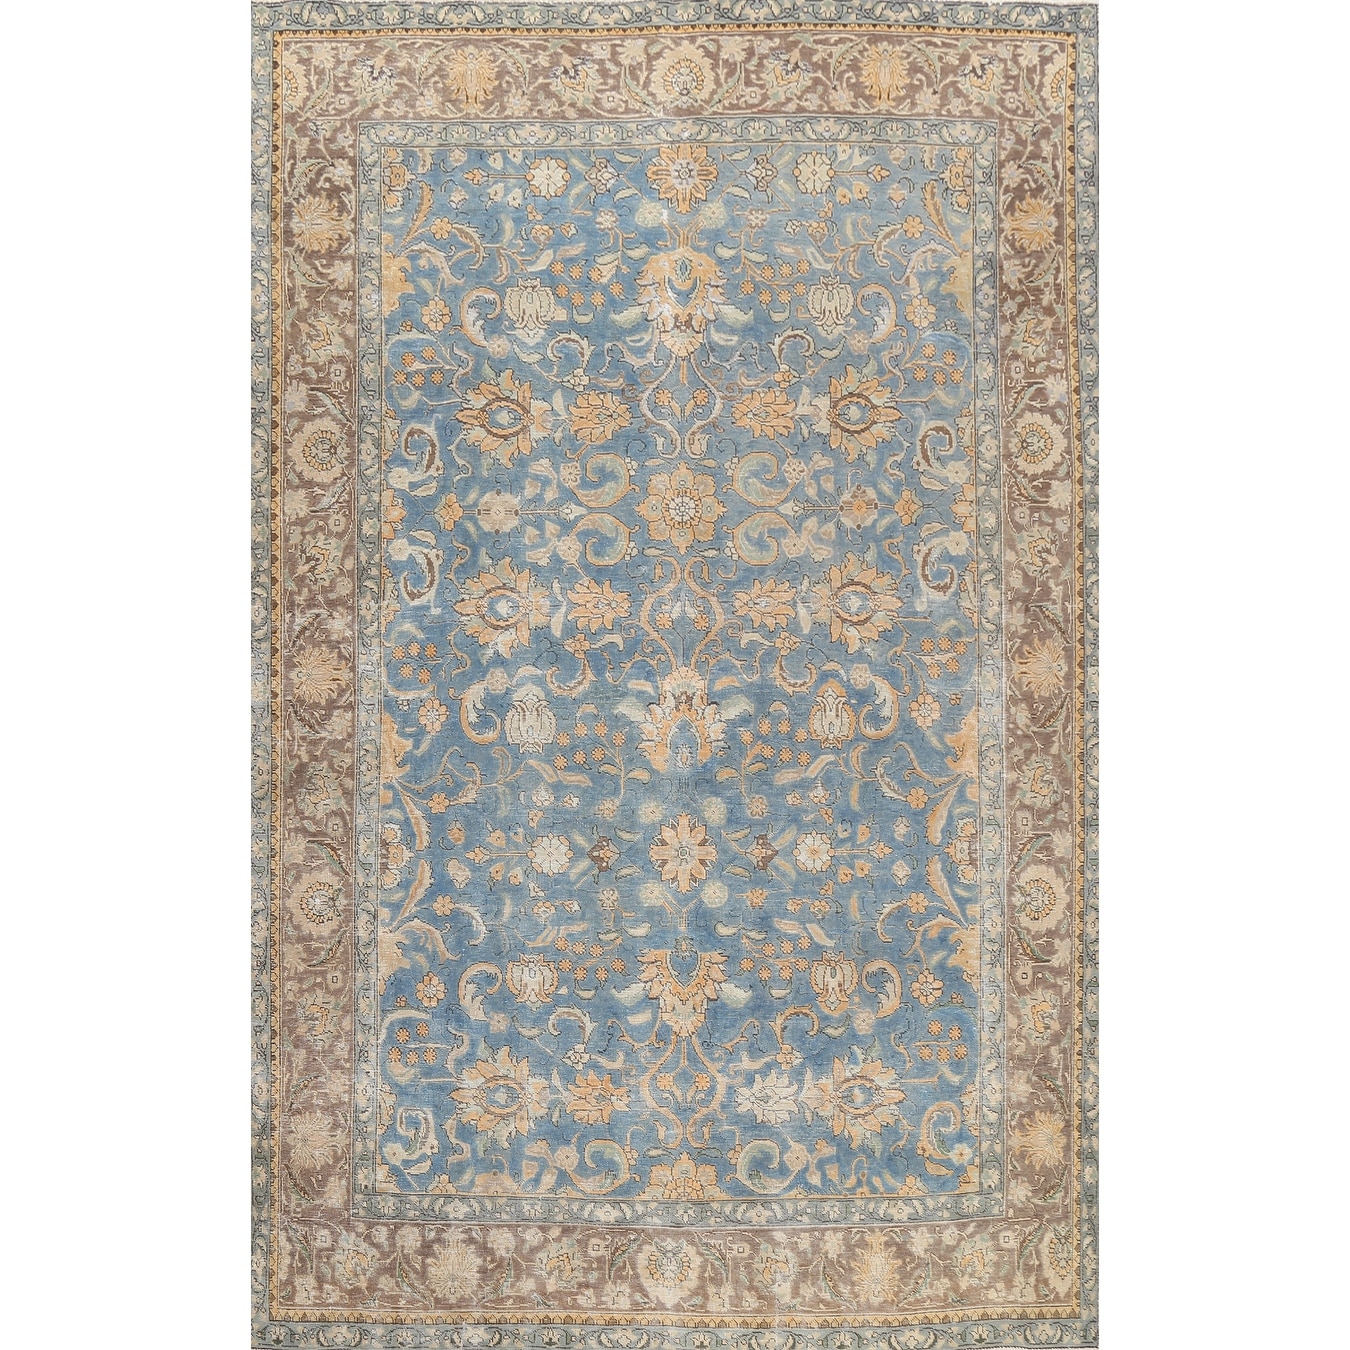 https://ak1.ostkcdn.com/images/products/is/images/direct/0f6189331f22022630bb695ac5c7d426d138def9/Vintage-Distressed-Persian-Tabriz-Area-Rug-Wool-Hand-knotted-Carpet.jpg